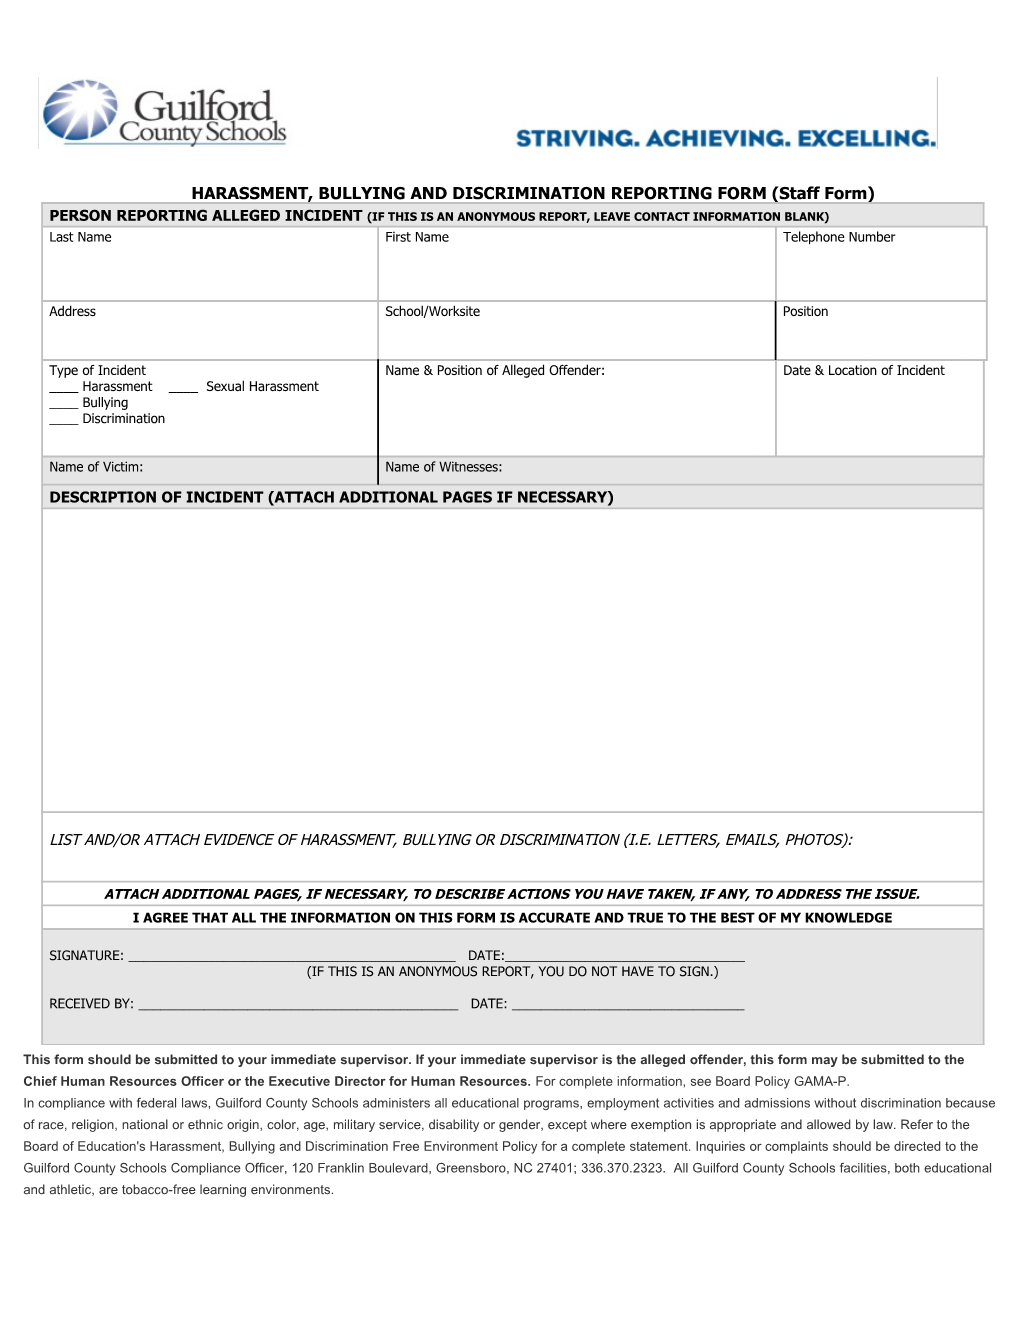 HARASSMENT, BULLYING and DISCRIMINATION REPORTING FORM (Staff Form)